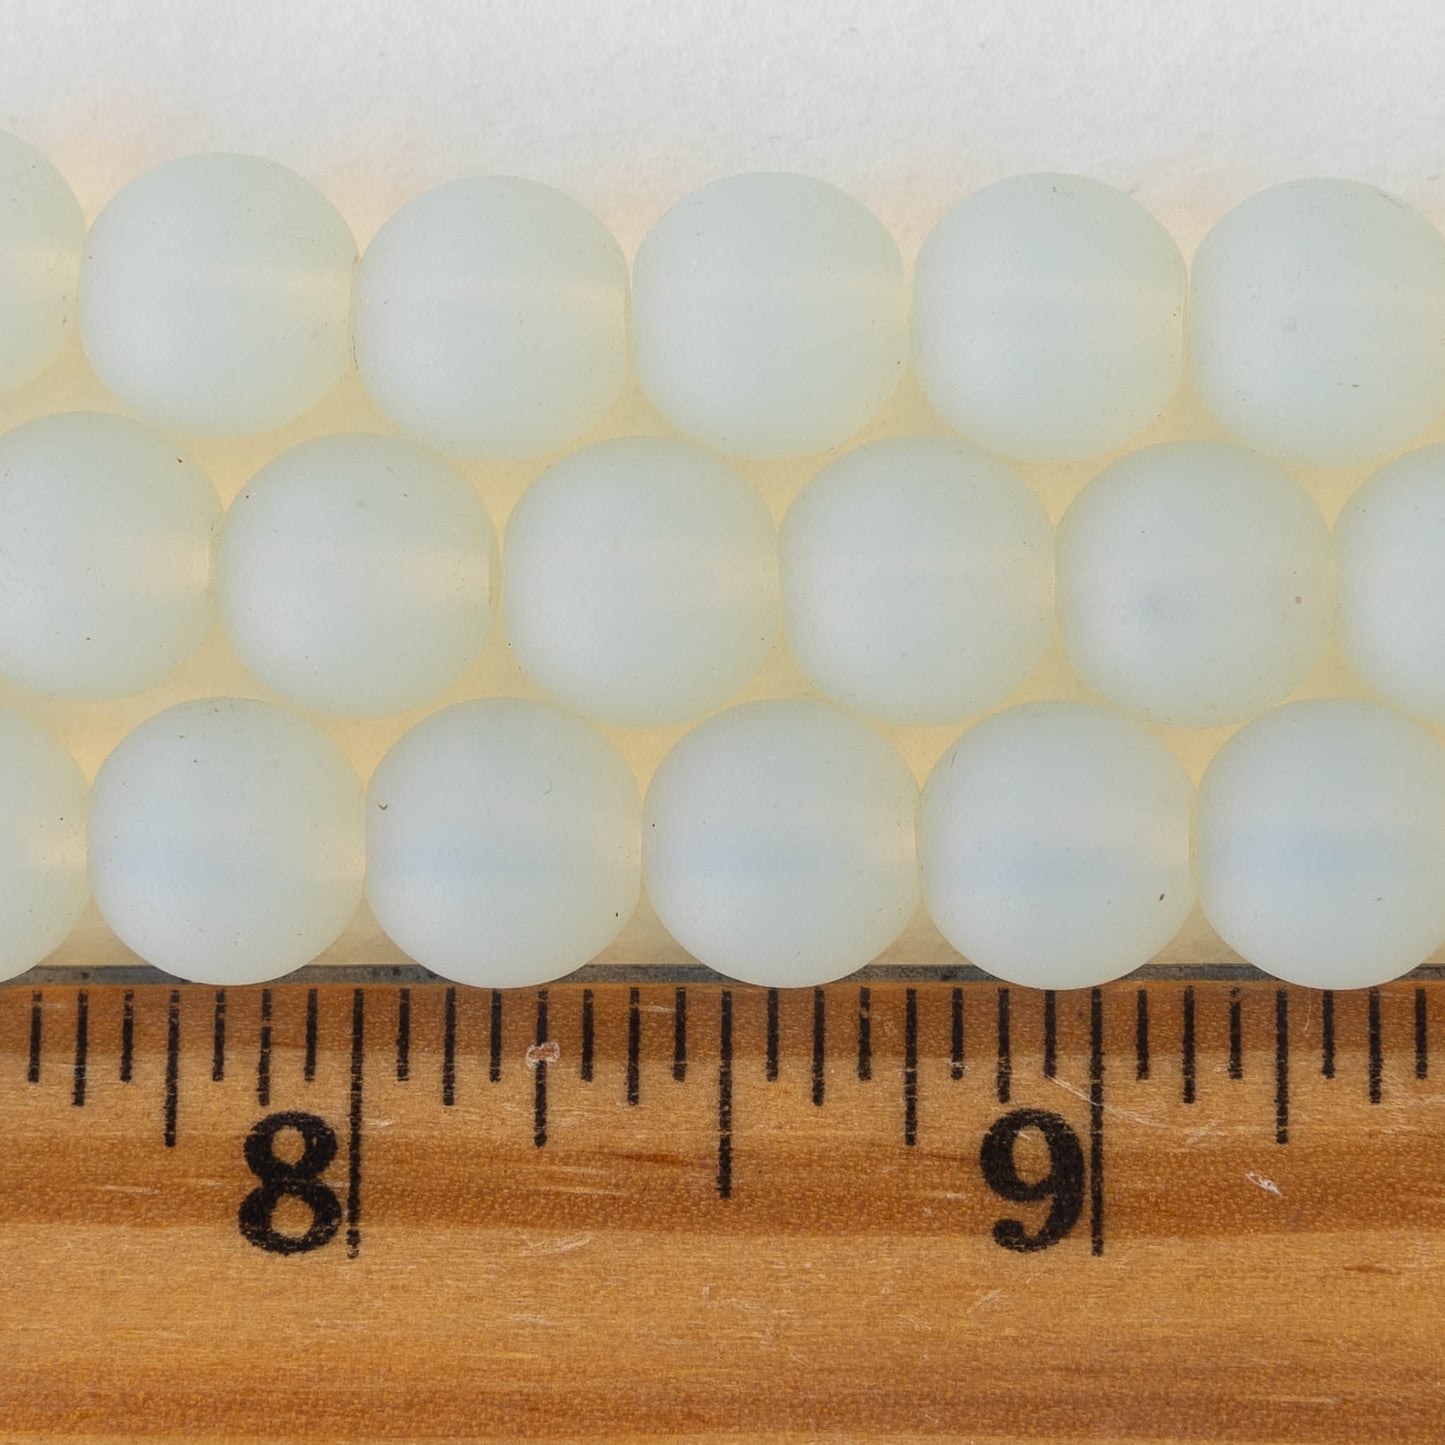 10mm Frosted Glass Rounds - Moonstone - 21 beads